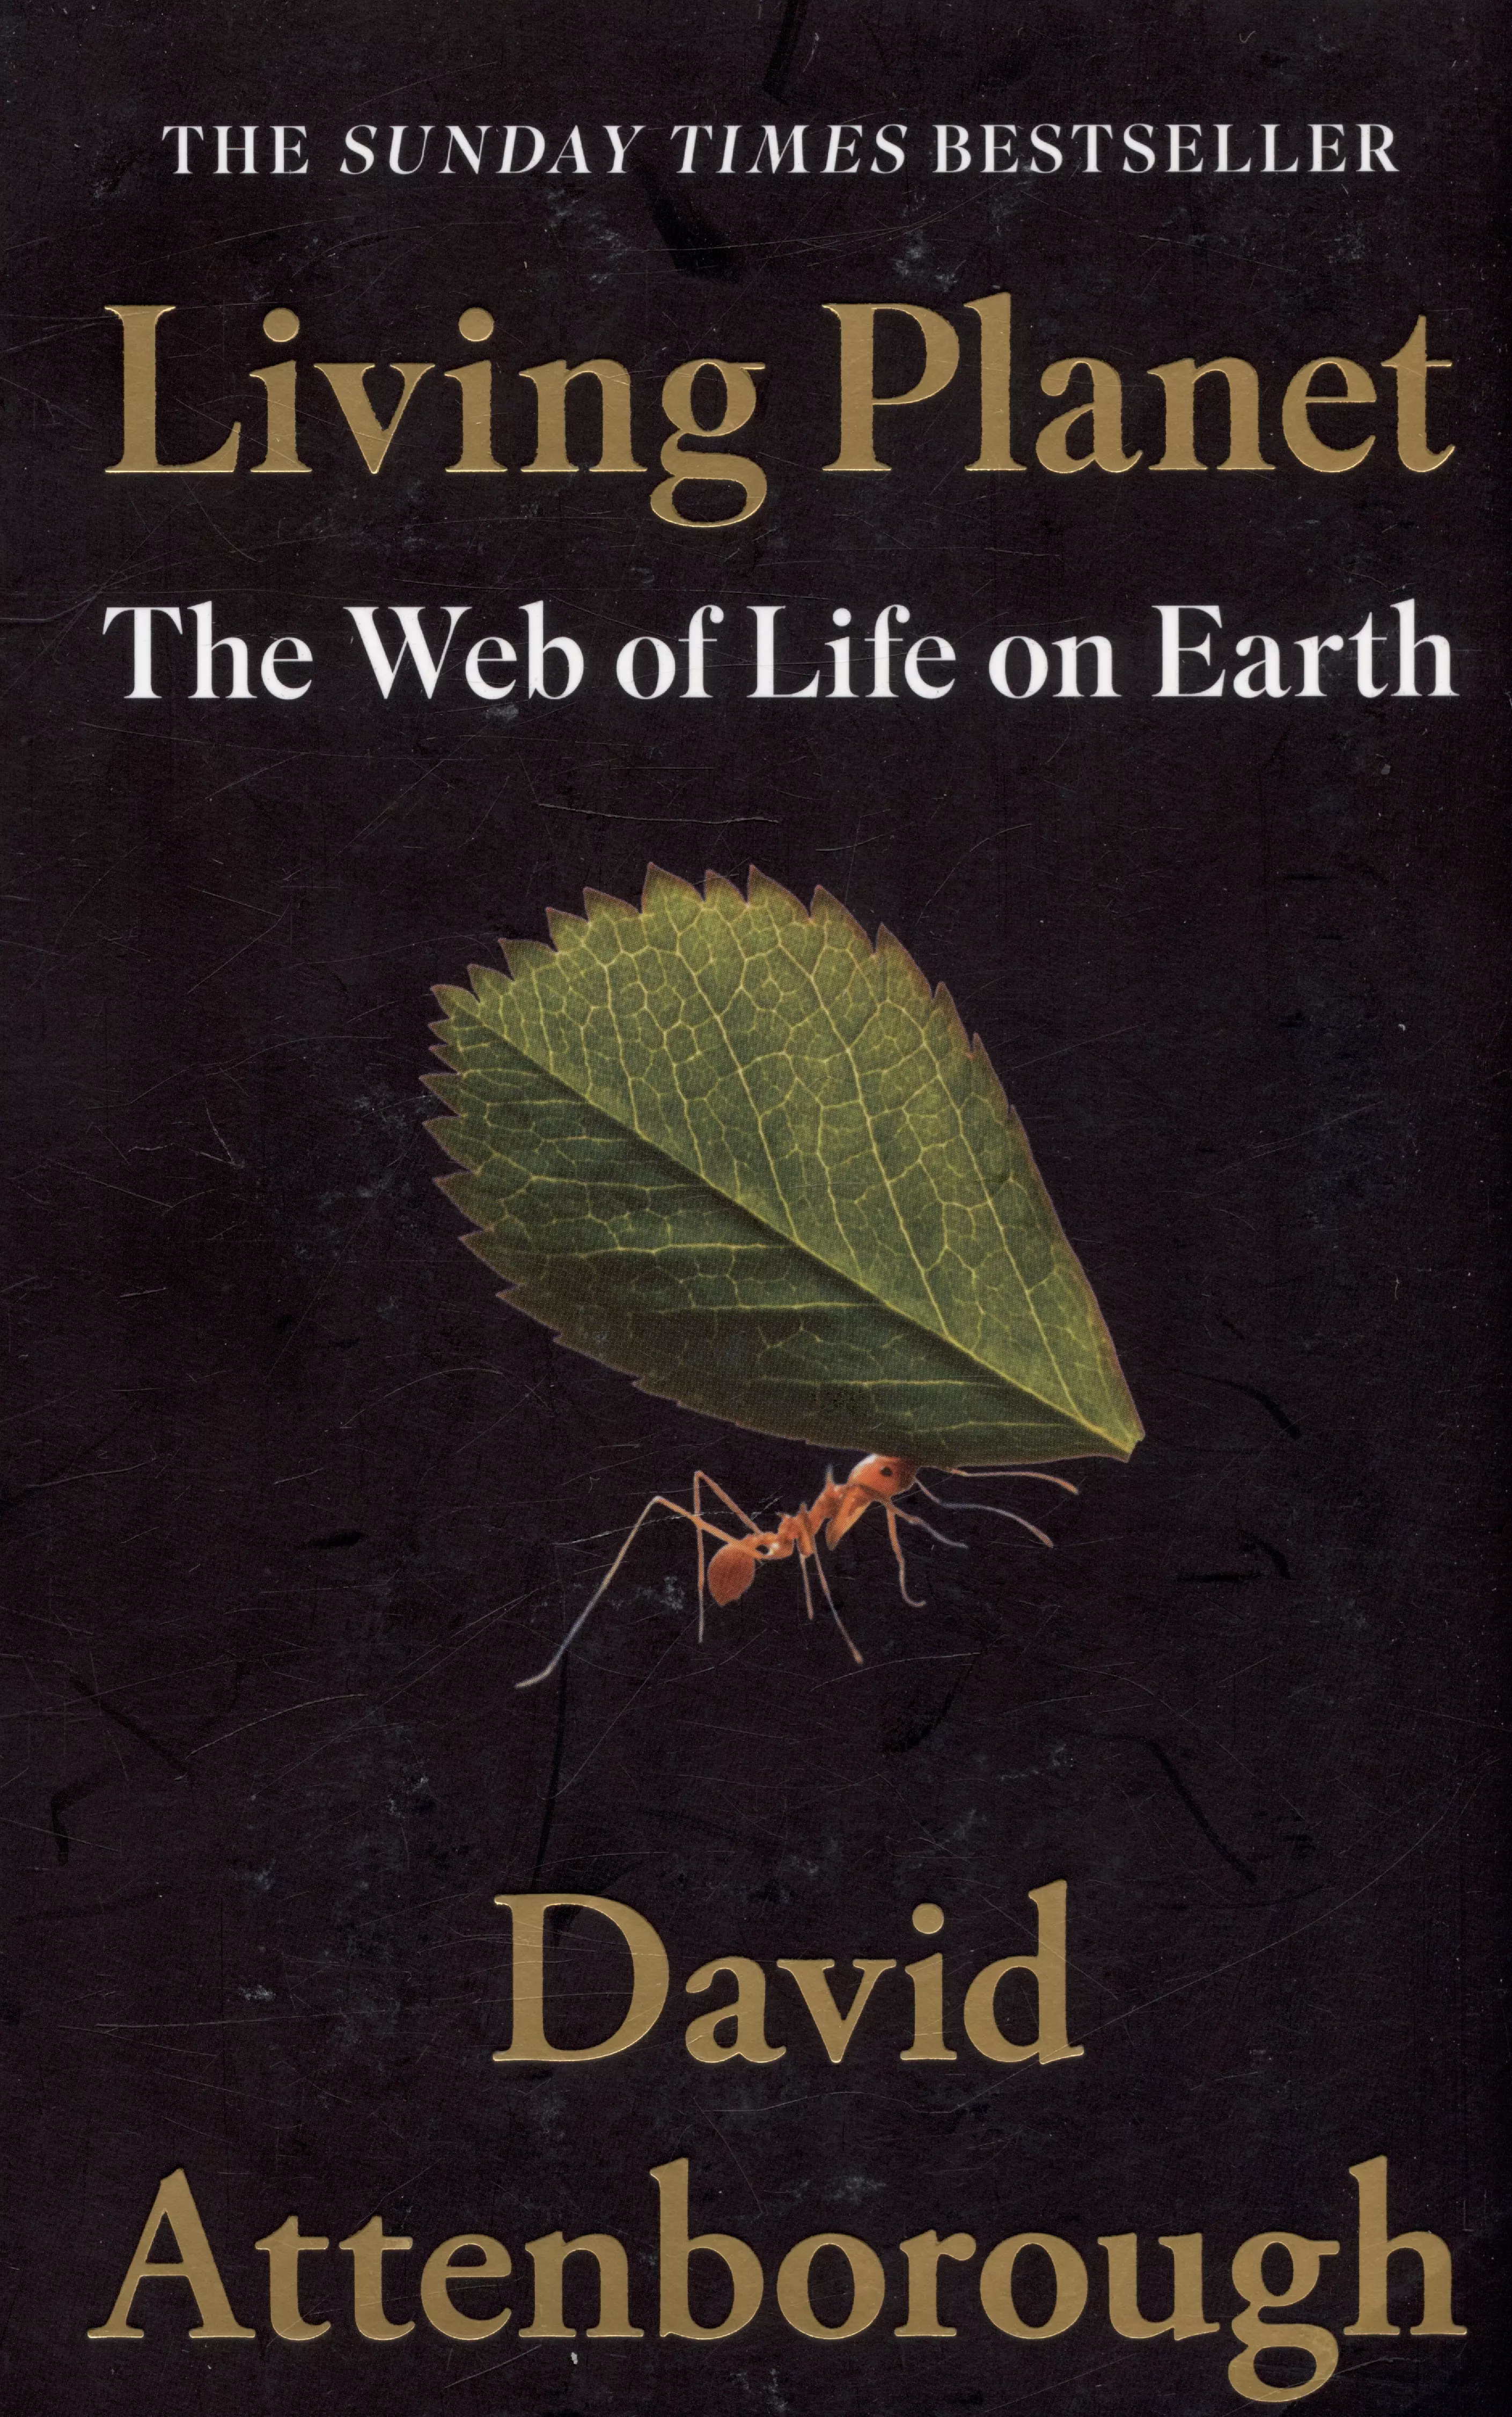 Attenborough David - Living Planet: The Web of Life on Earth